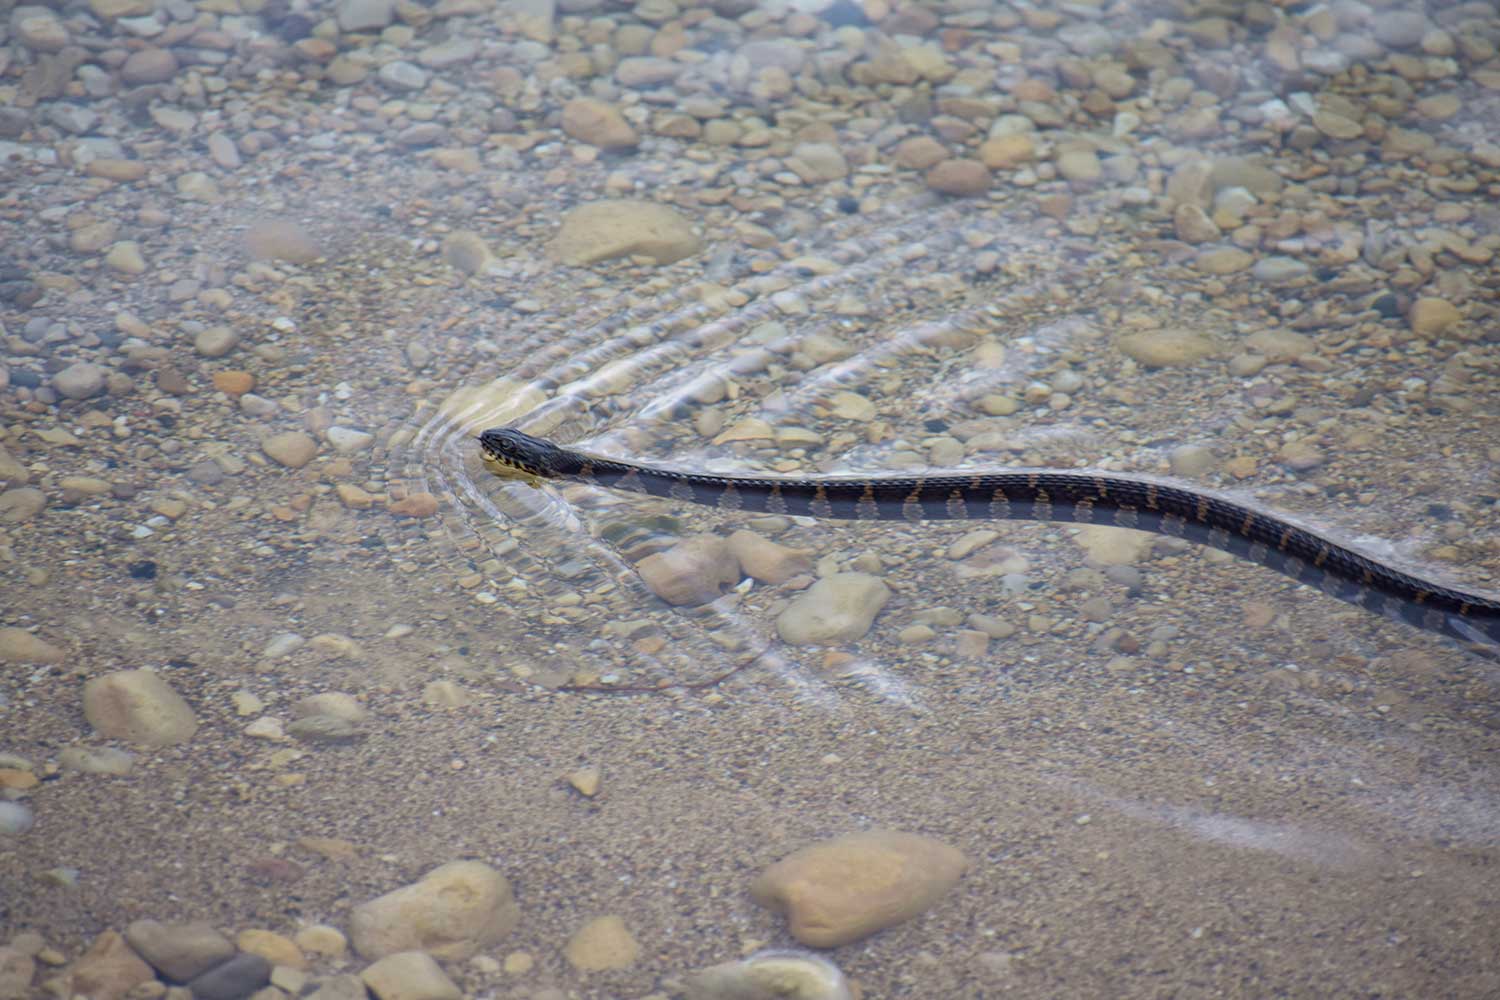 A snake swimming in shallow water.